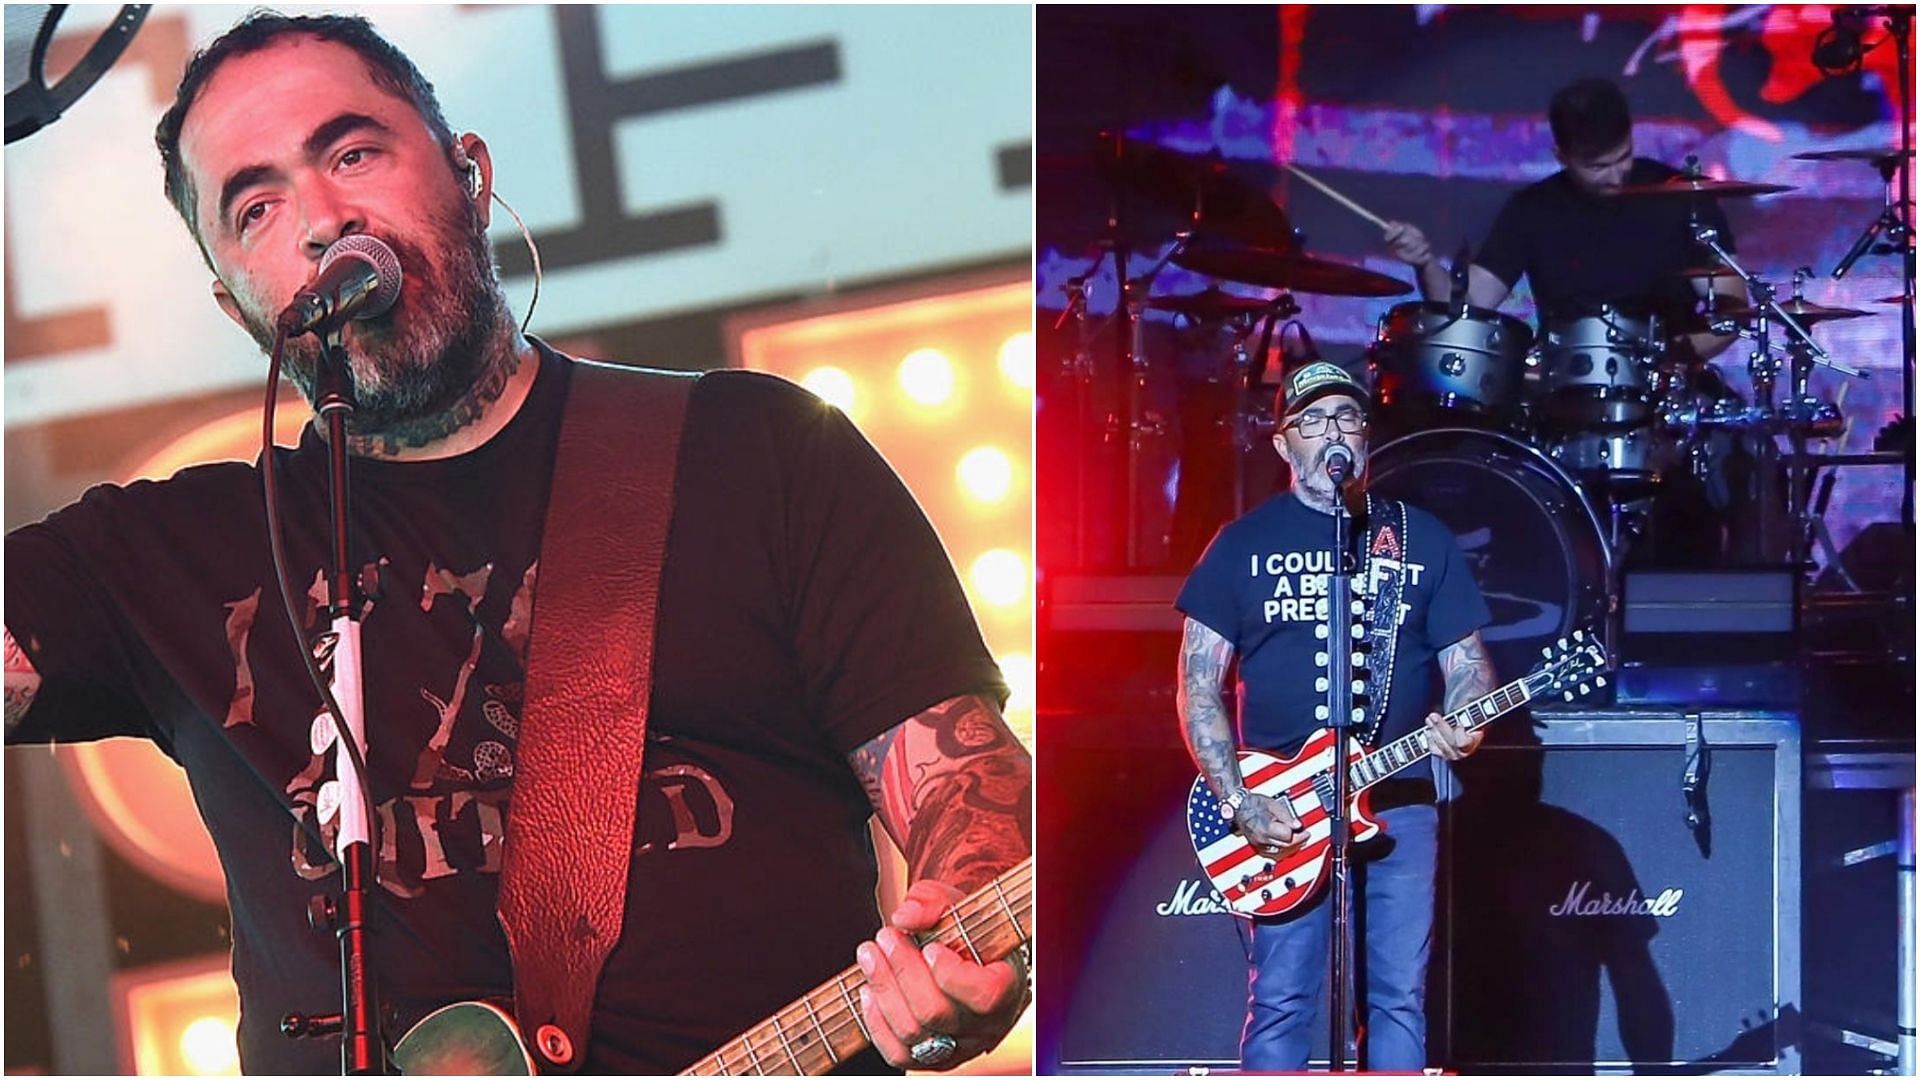 Staind have announced a 12-date tour slated for September. (Images via Kevin Mazur for Getty/Instagram @staind)